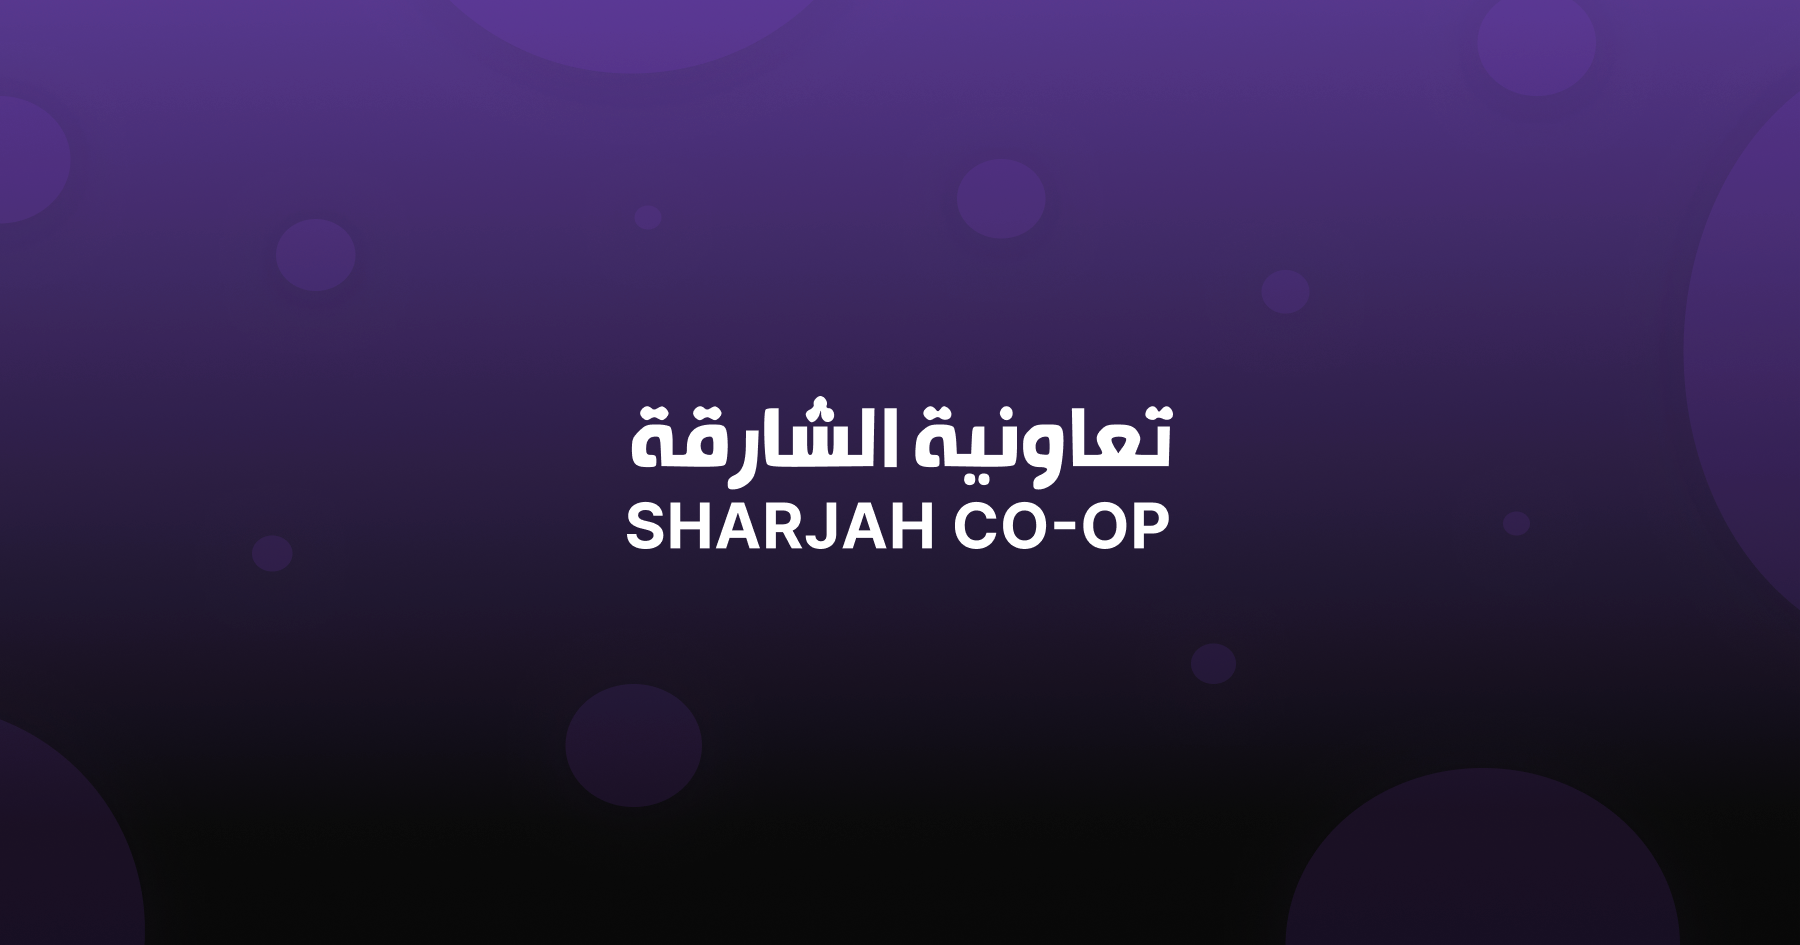 "Everyone should have access to data". Testimonial from SHARJAH COOP